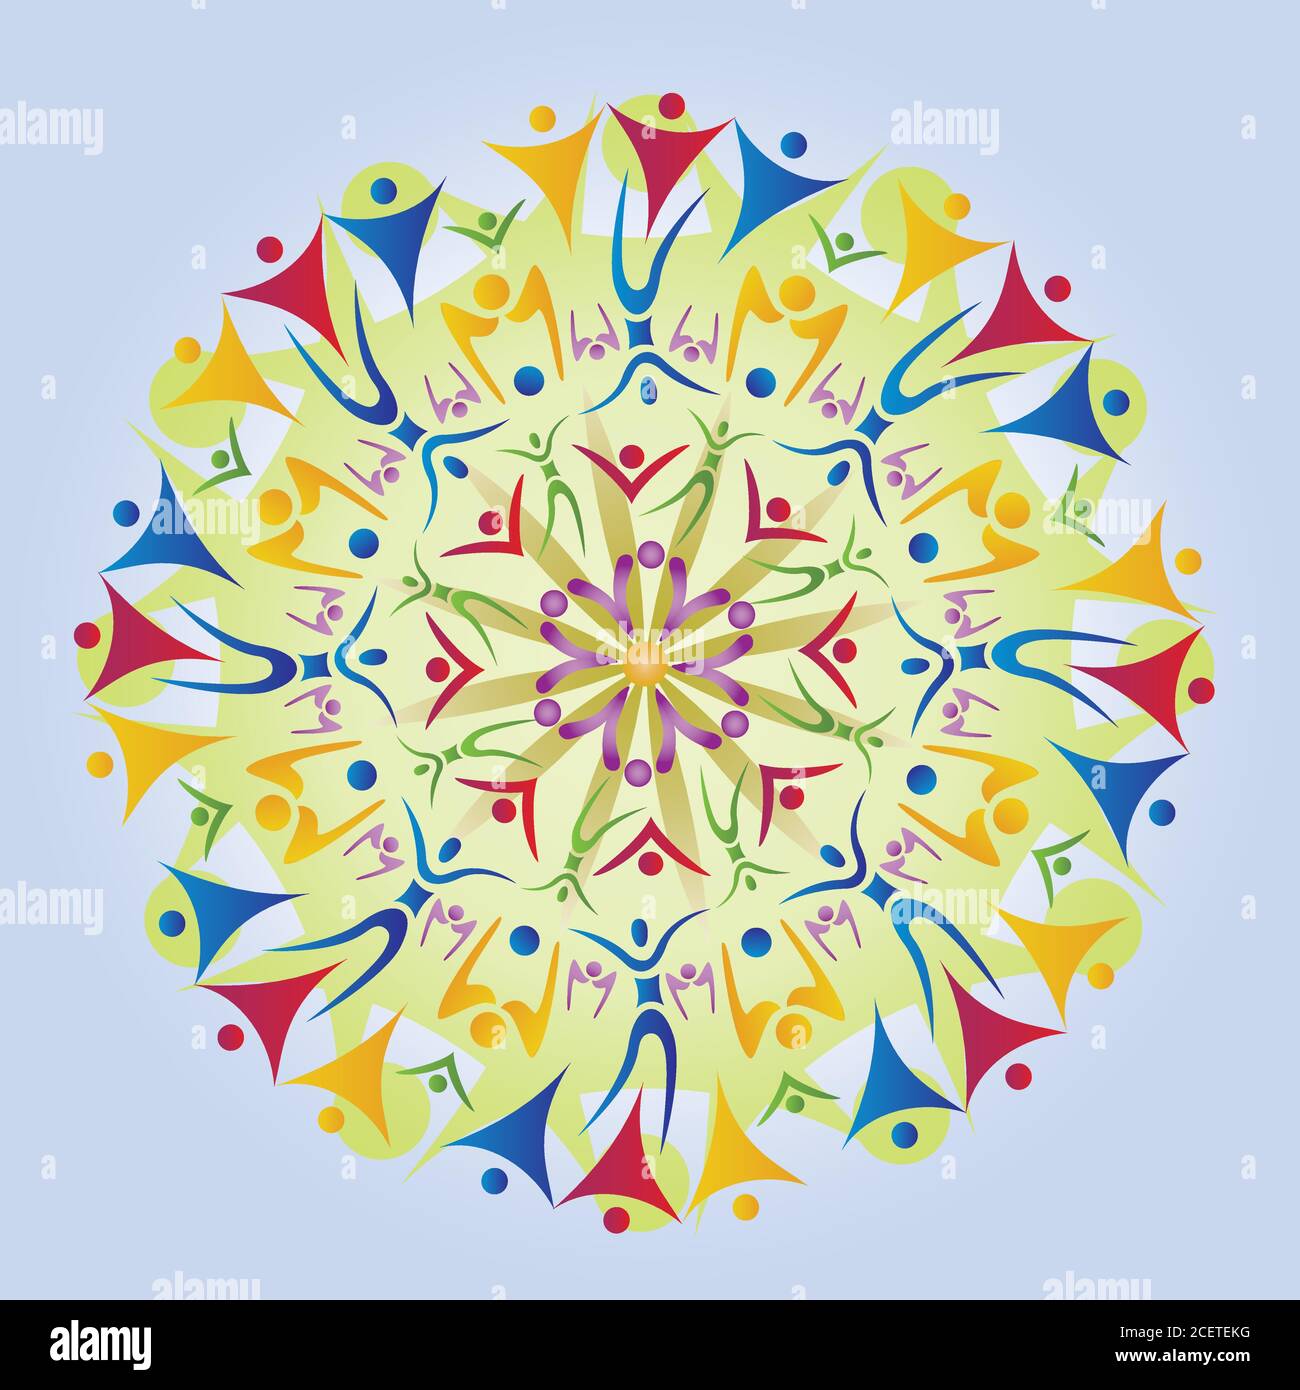 Mandala made of Body Icons - Silhouettes - Multicolored - Flower Rainbow Stock Vector